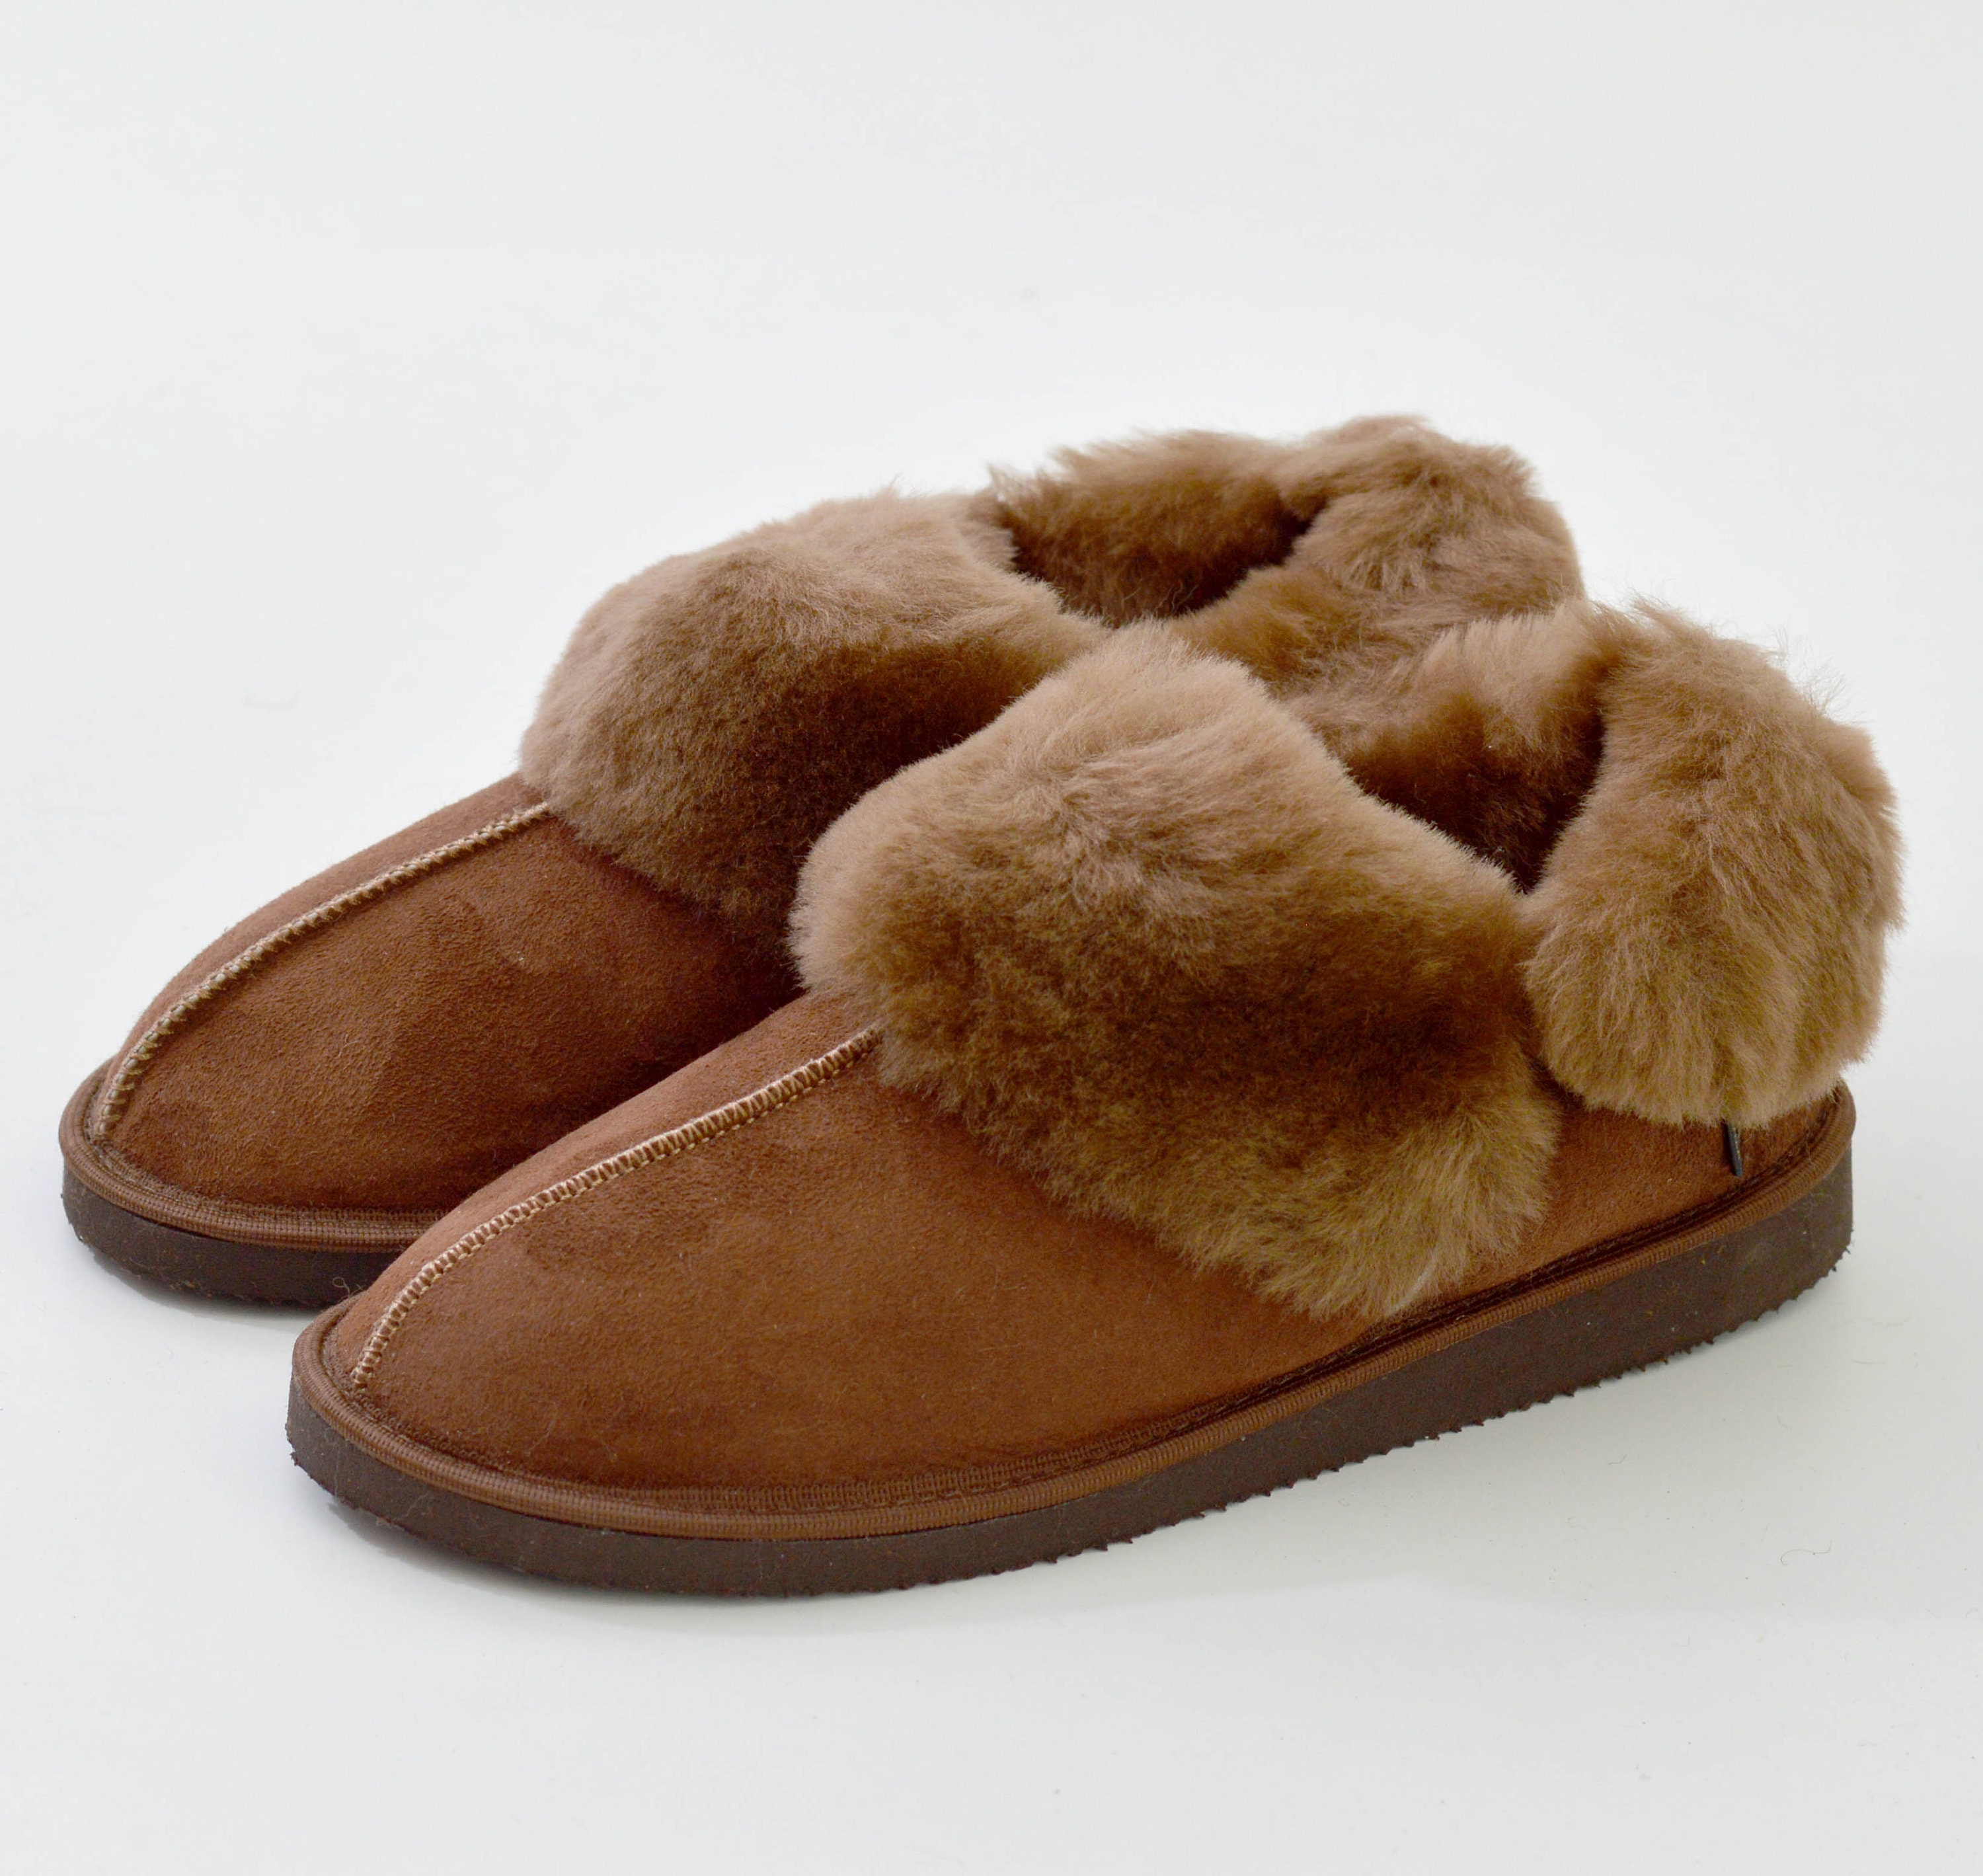 Yeti Handcrafted New Men Women Ladies Sheepskin Moccassin Boot Slippers  Made From 100% Just Fur Lined Unique Gift Present Idea Eco Shearling 